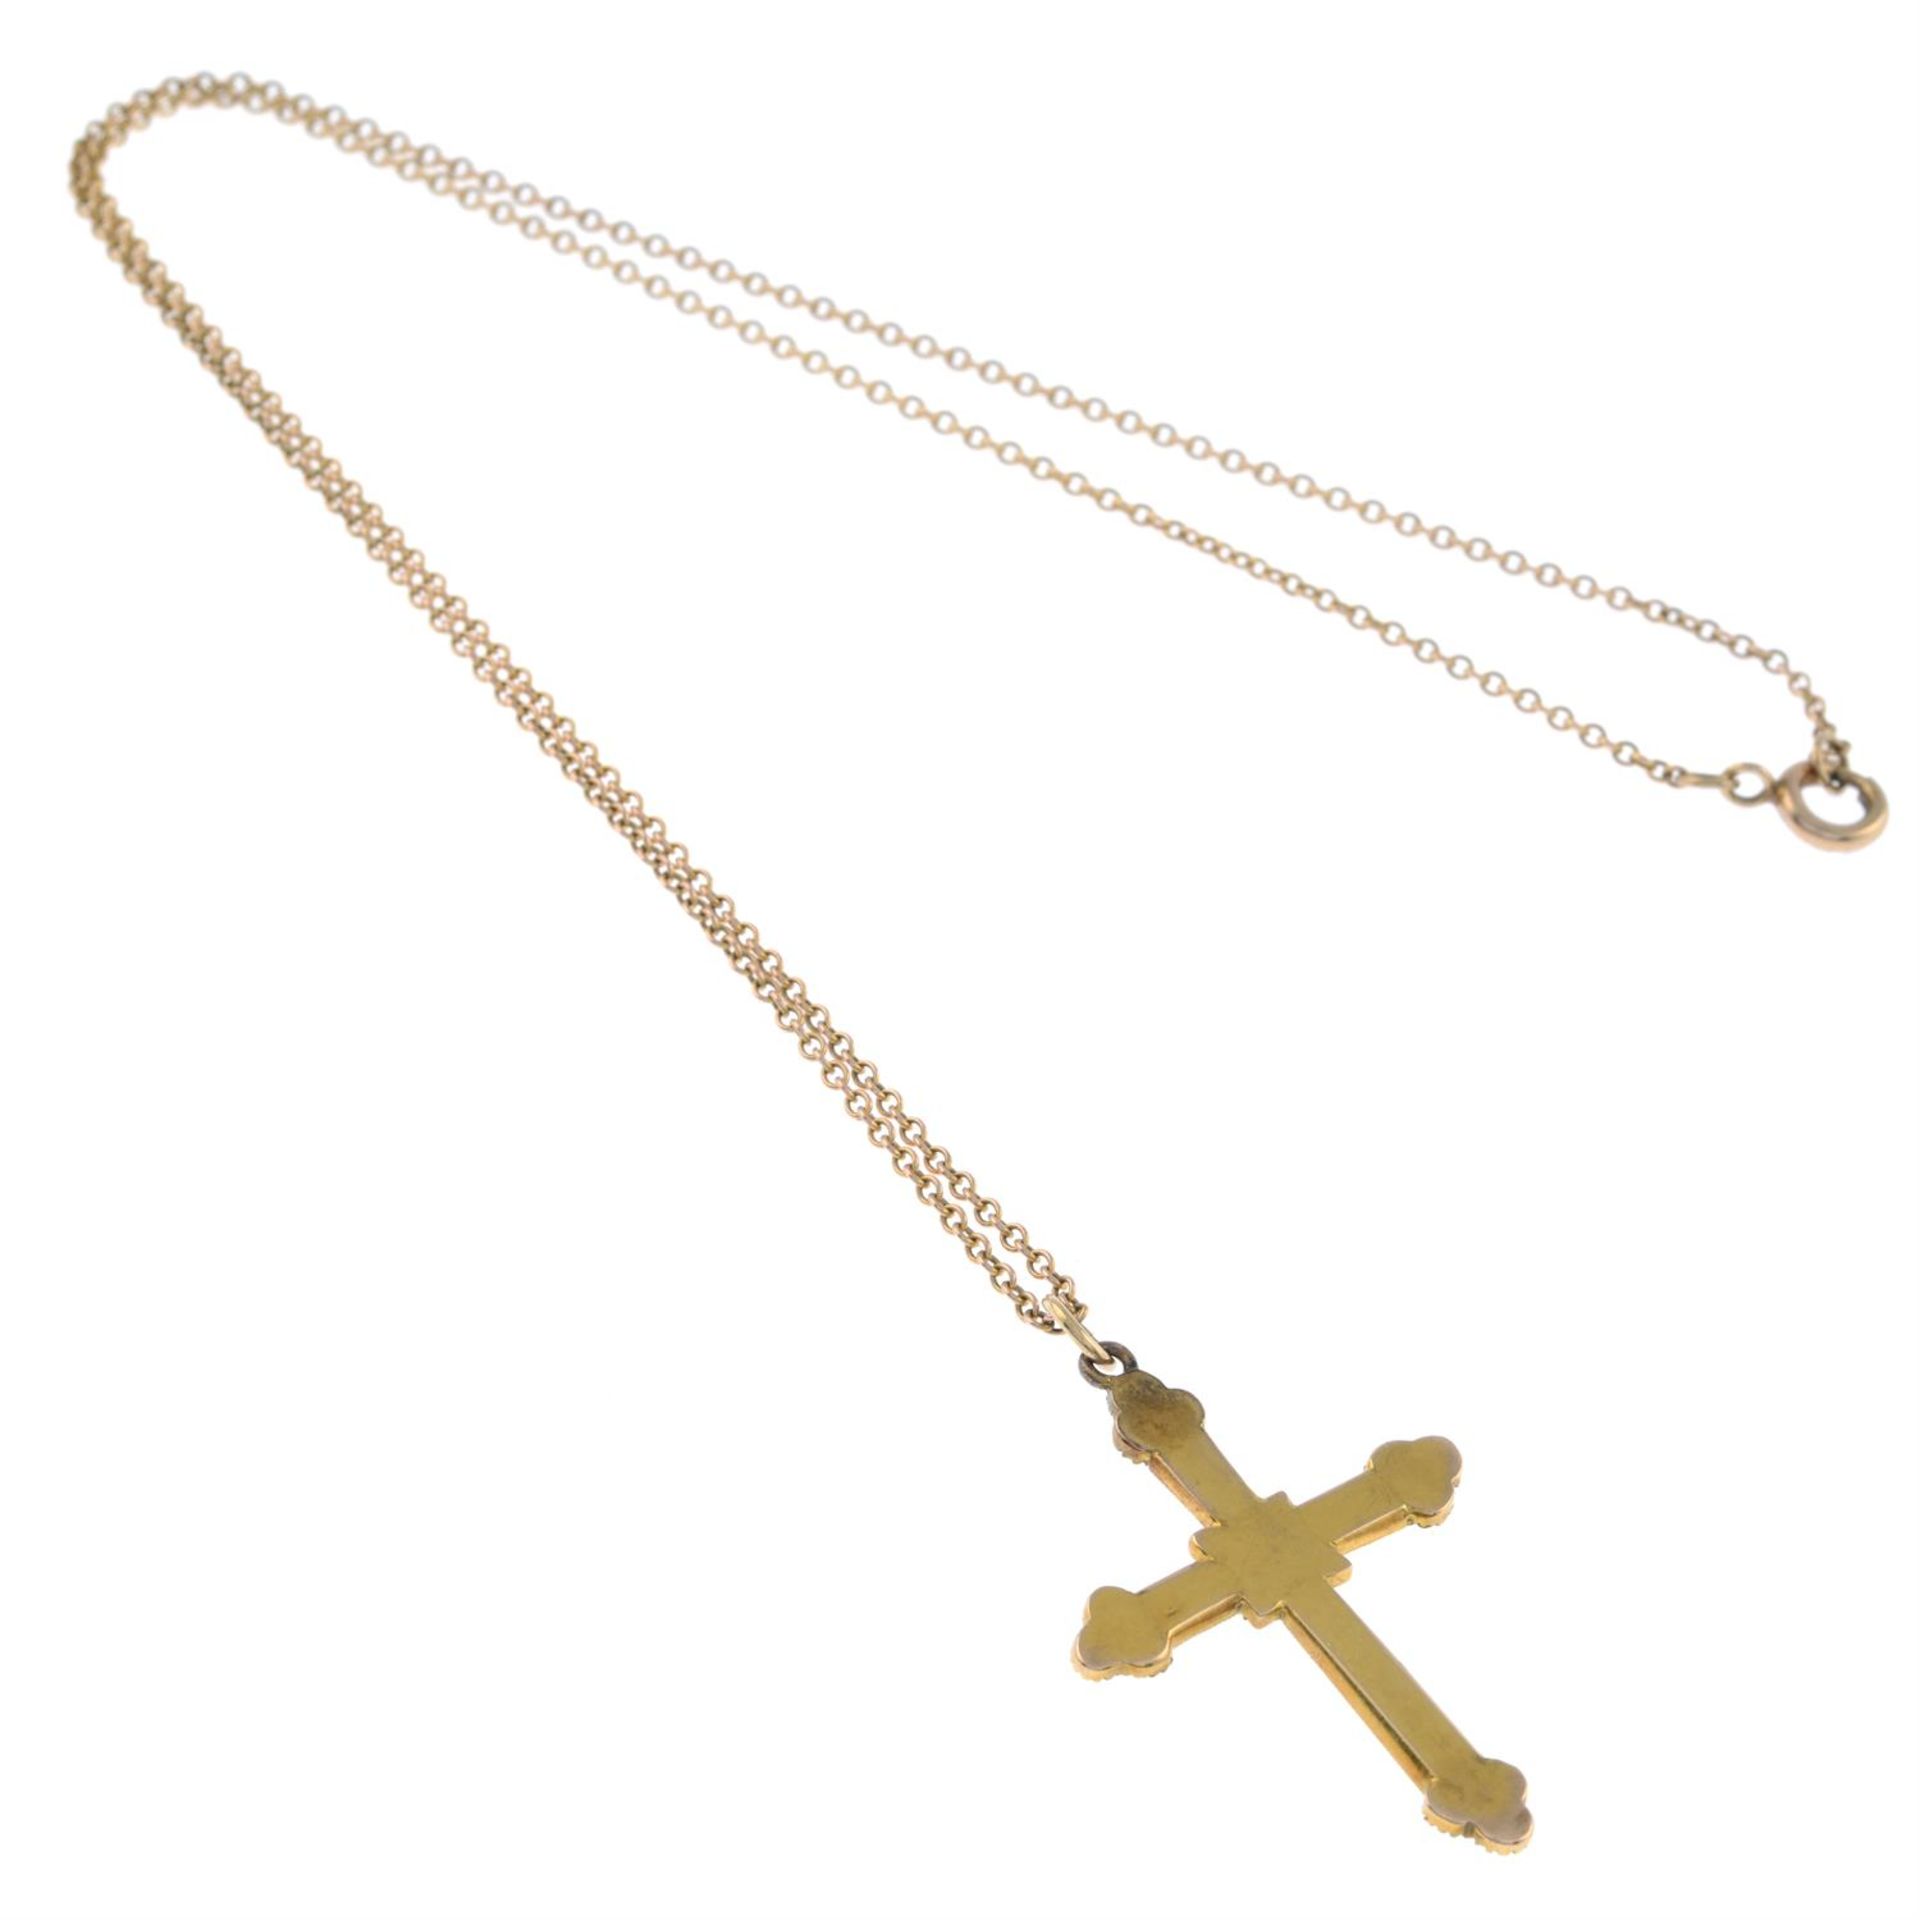 Early 20th century gold split pearl cross pendant, with chain - Image 2 of 2